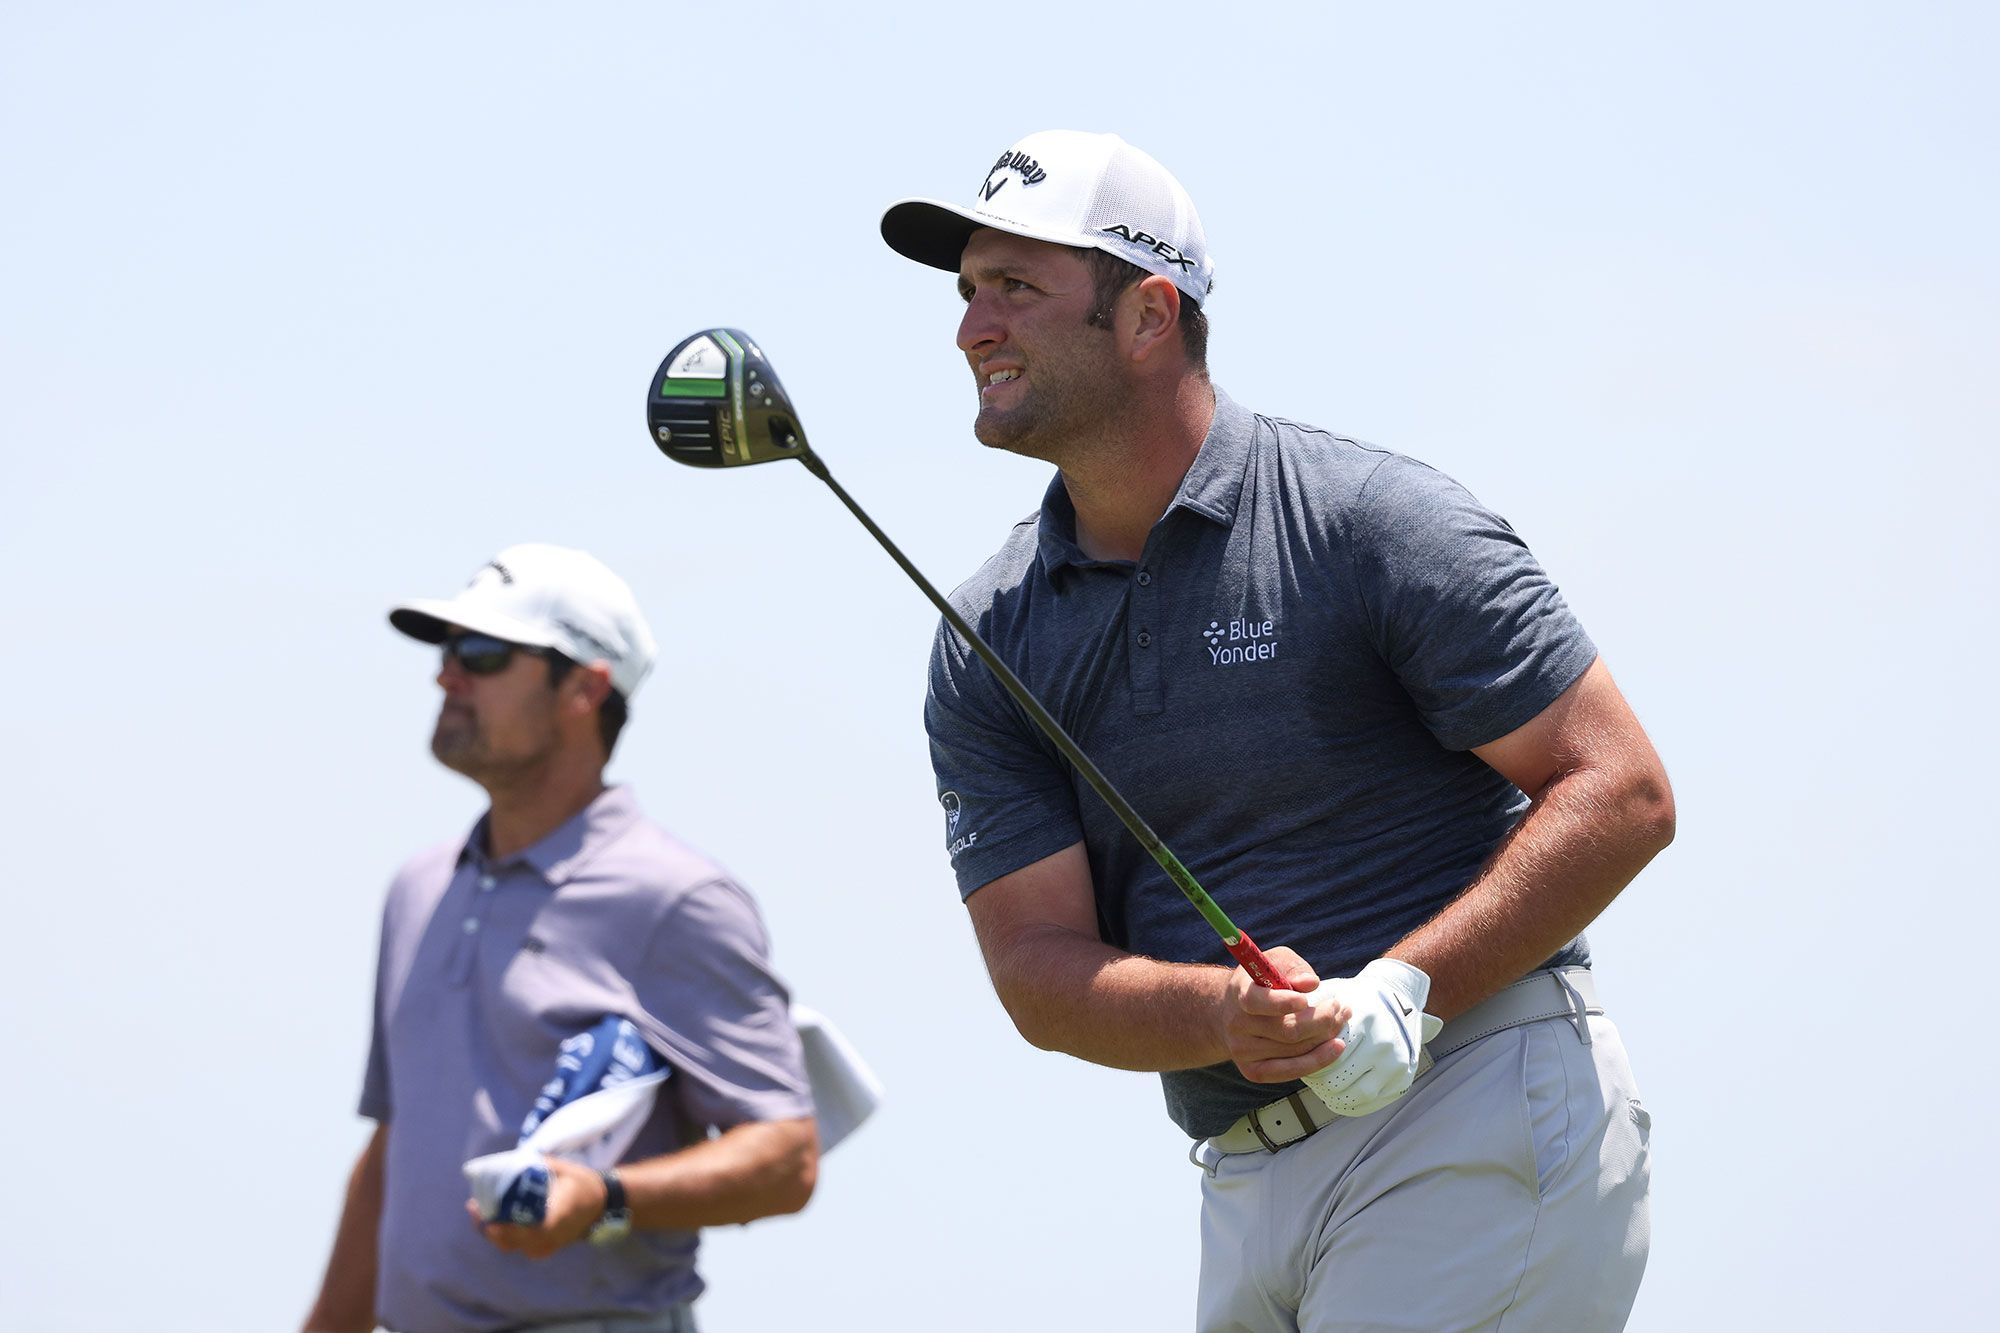 US Open: Jon Rahm Emerges From COVID 19 Fiasco With Grace